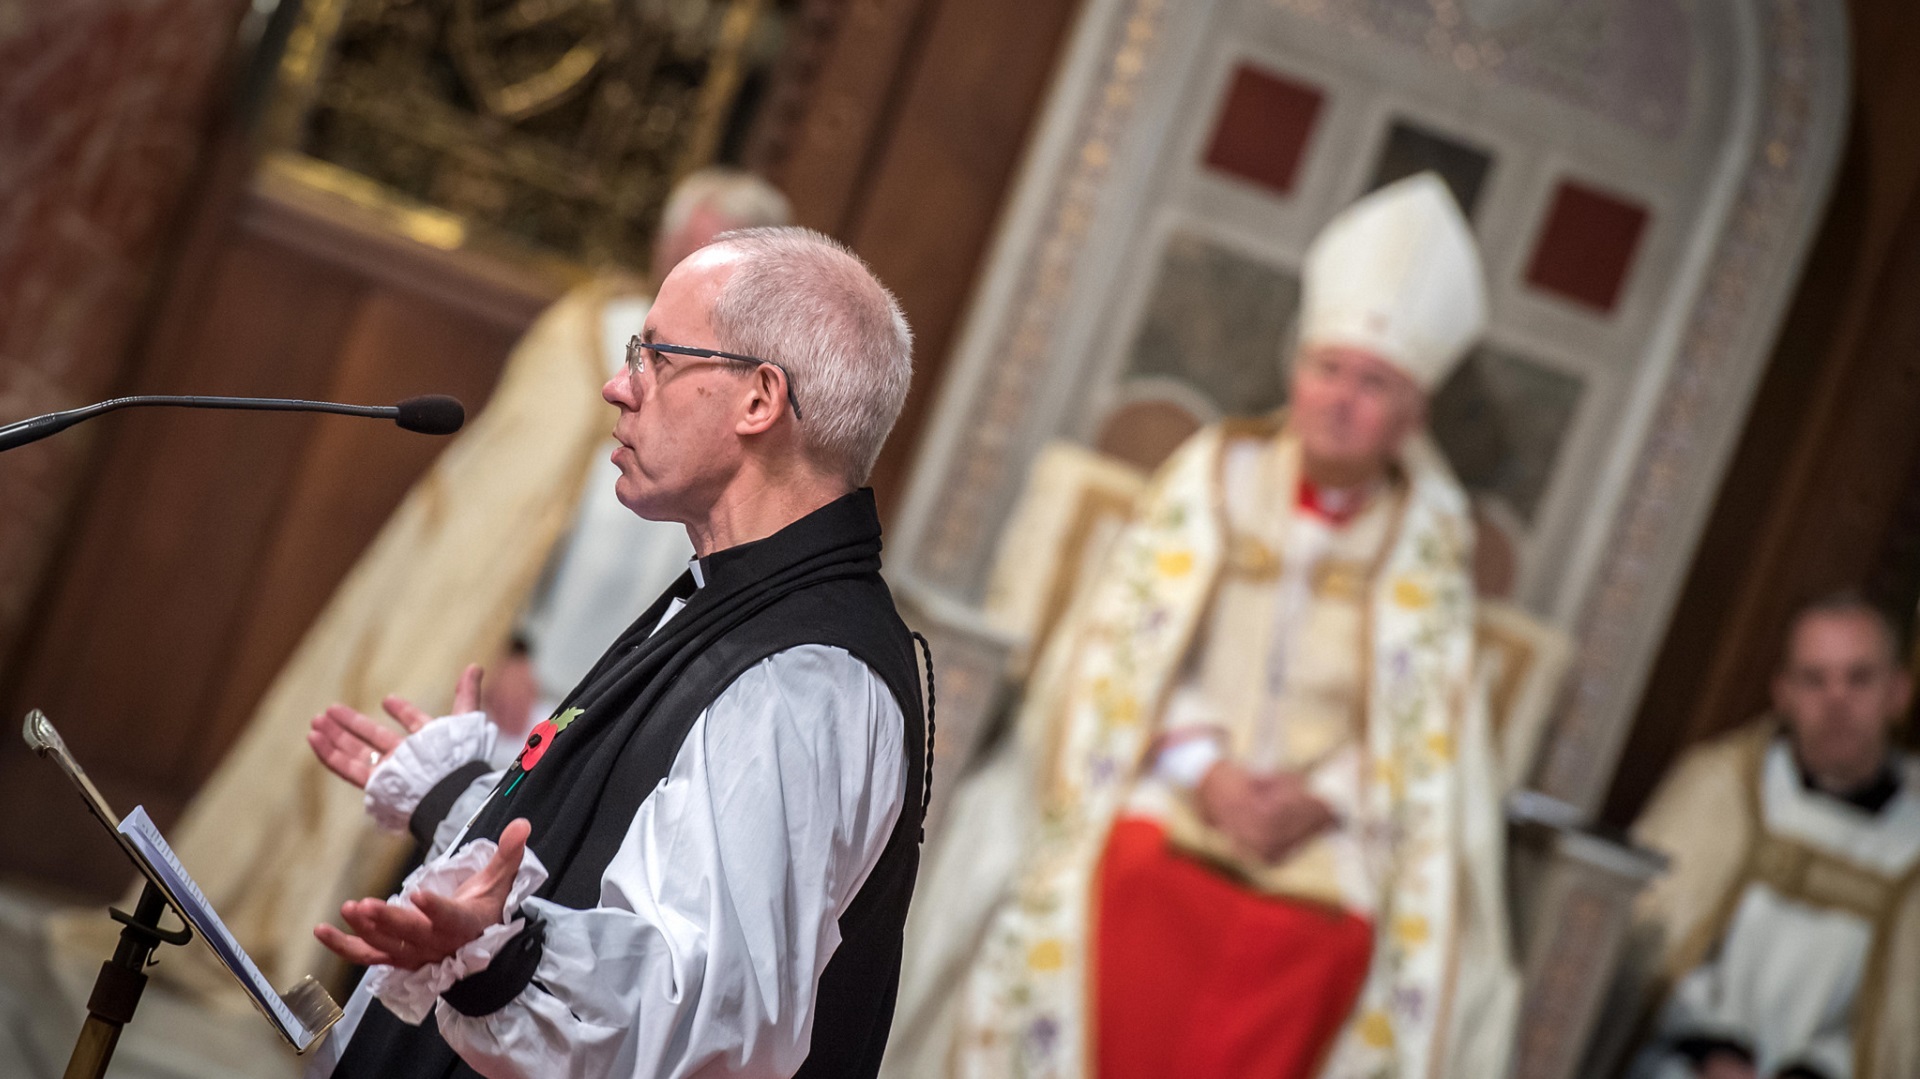 Justin Welby has announced plans to tackle the housing crisis